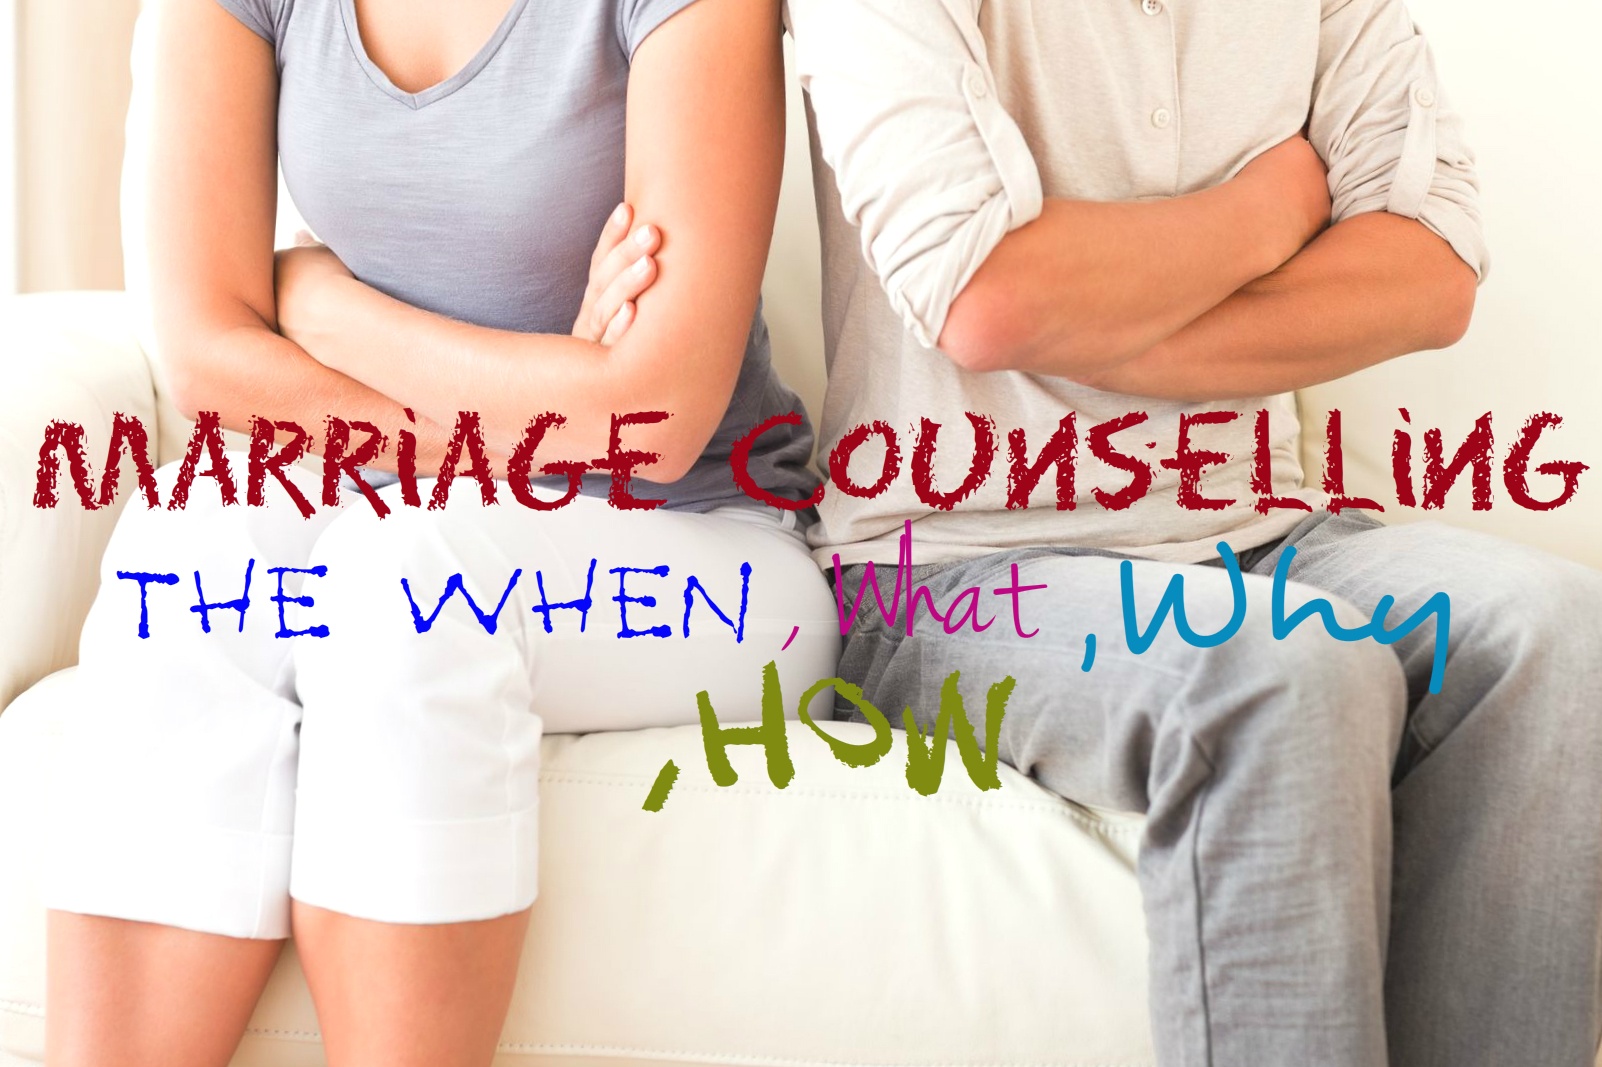 Marriage Counselling – The When, What, Why, How, couples sitting together